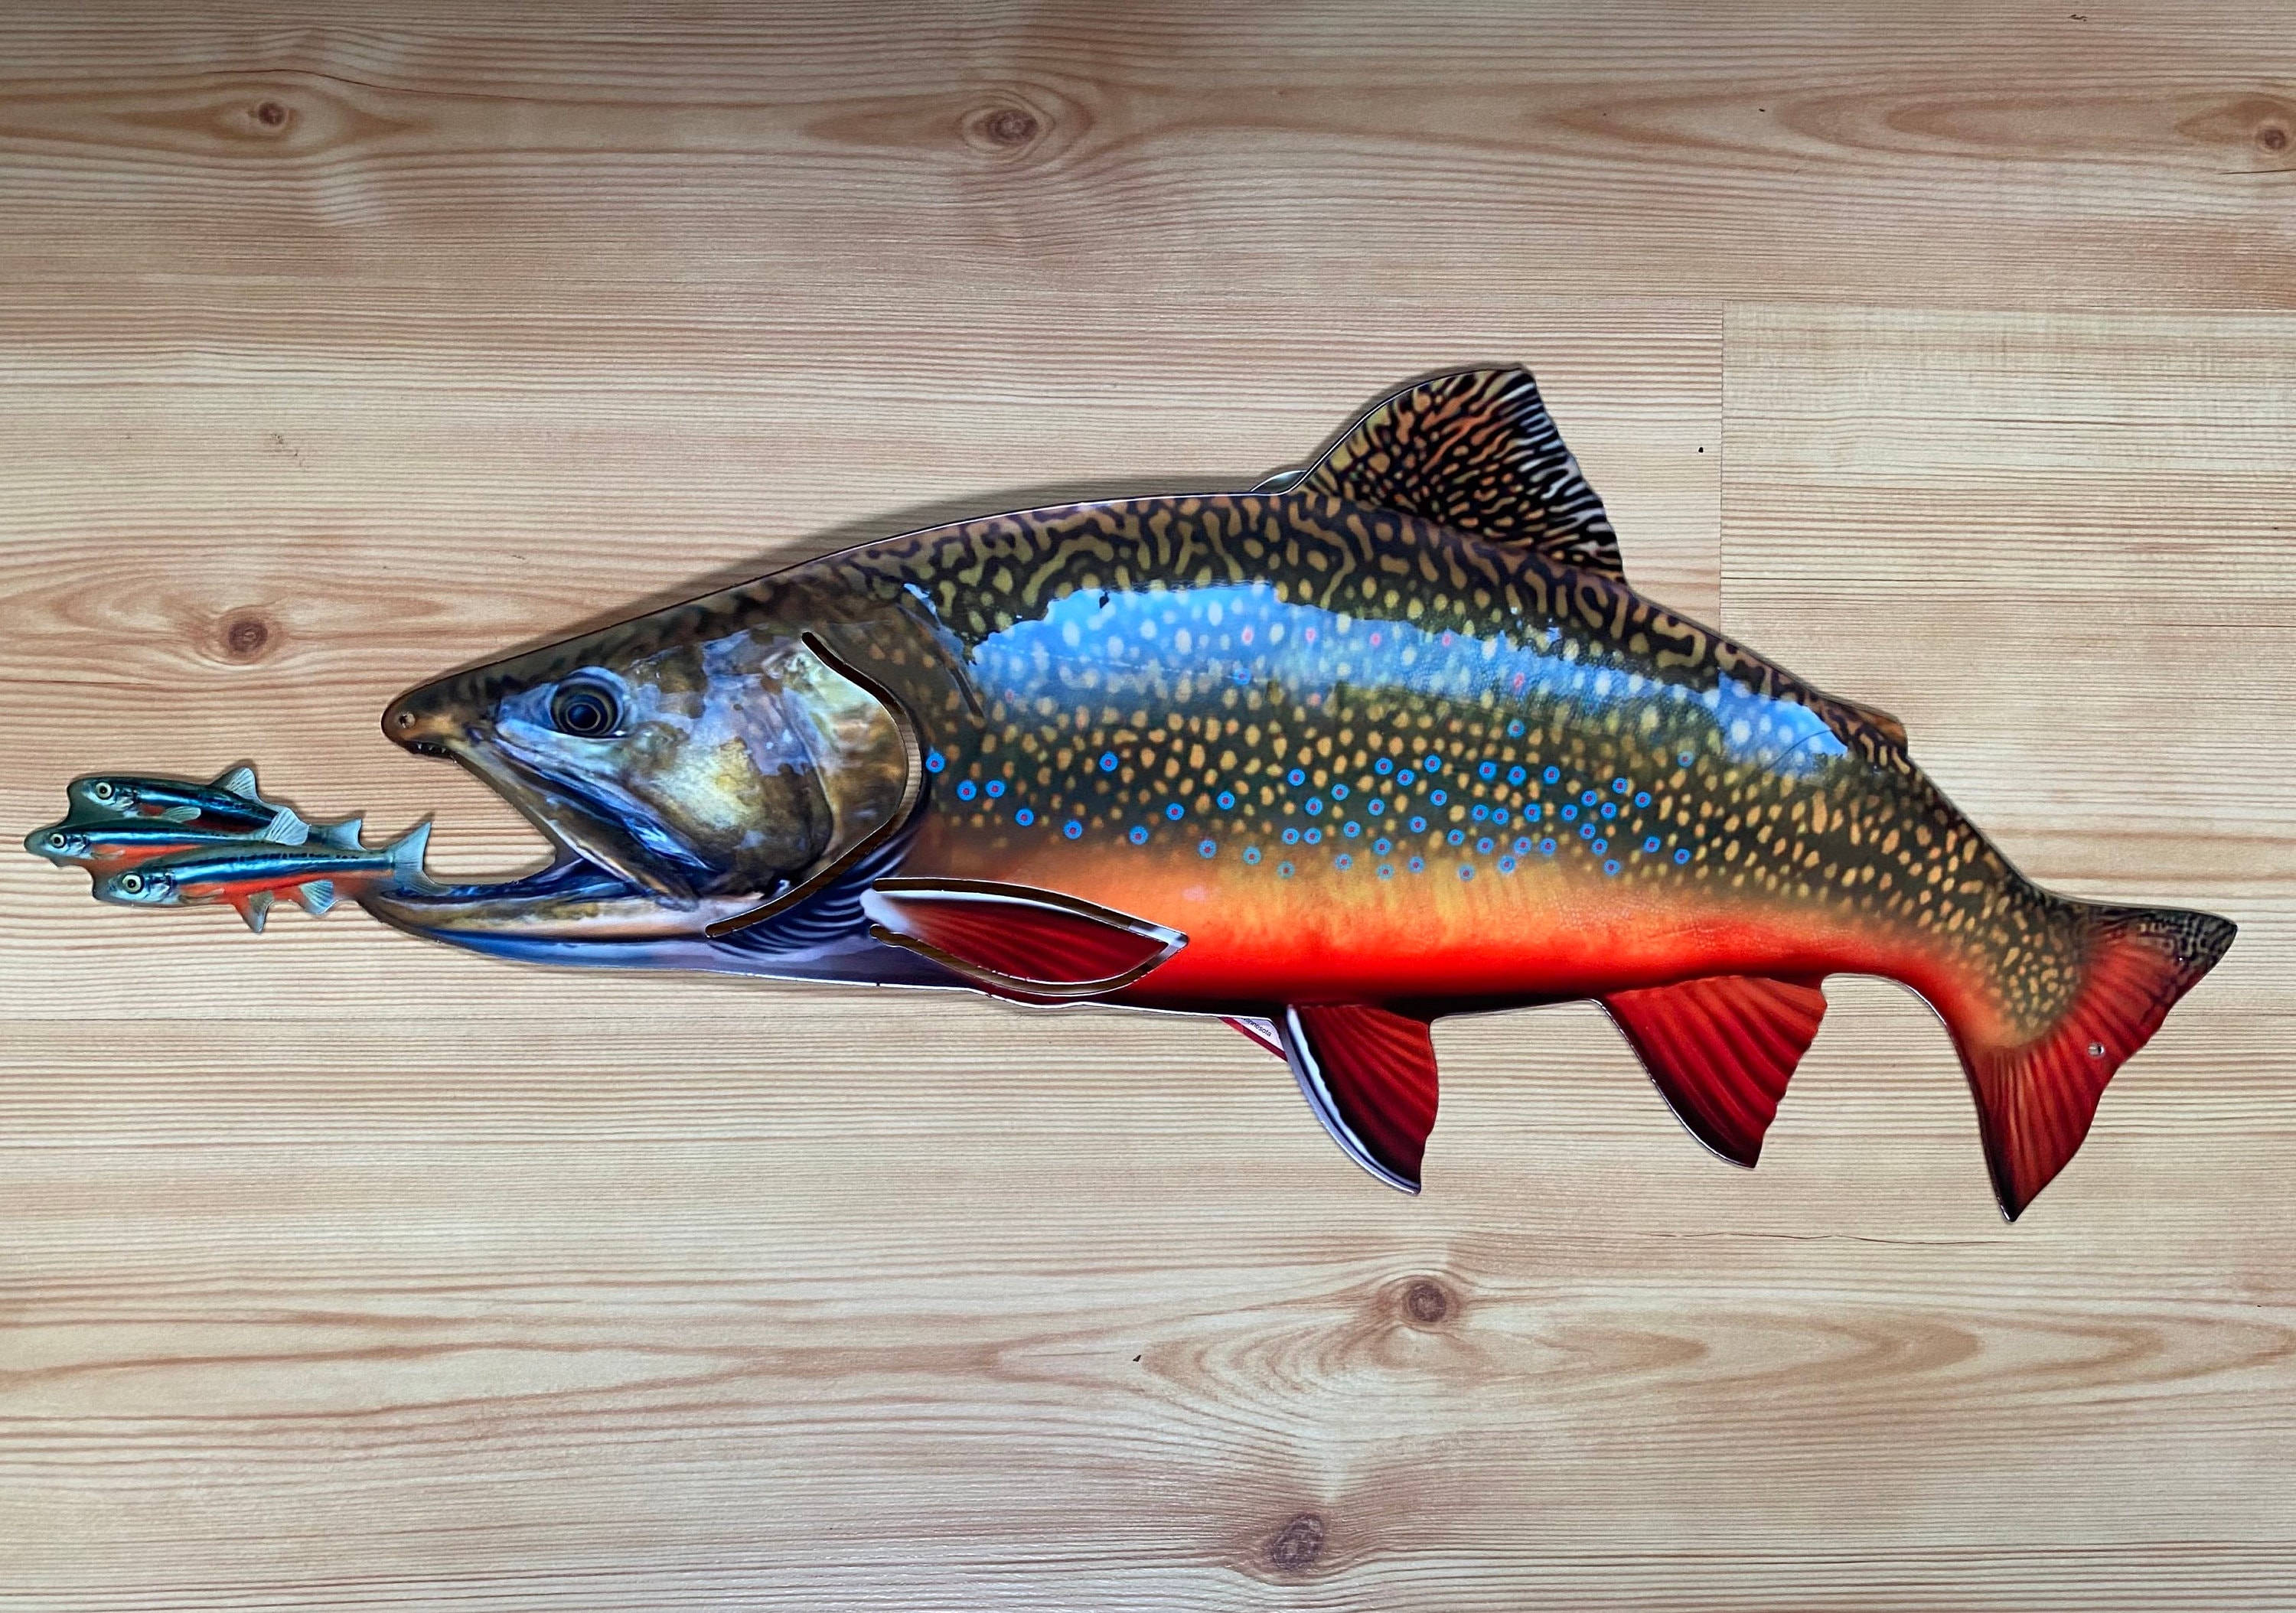 Brook Trout Cap for Sale by MikaelJenei